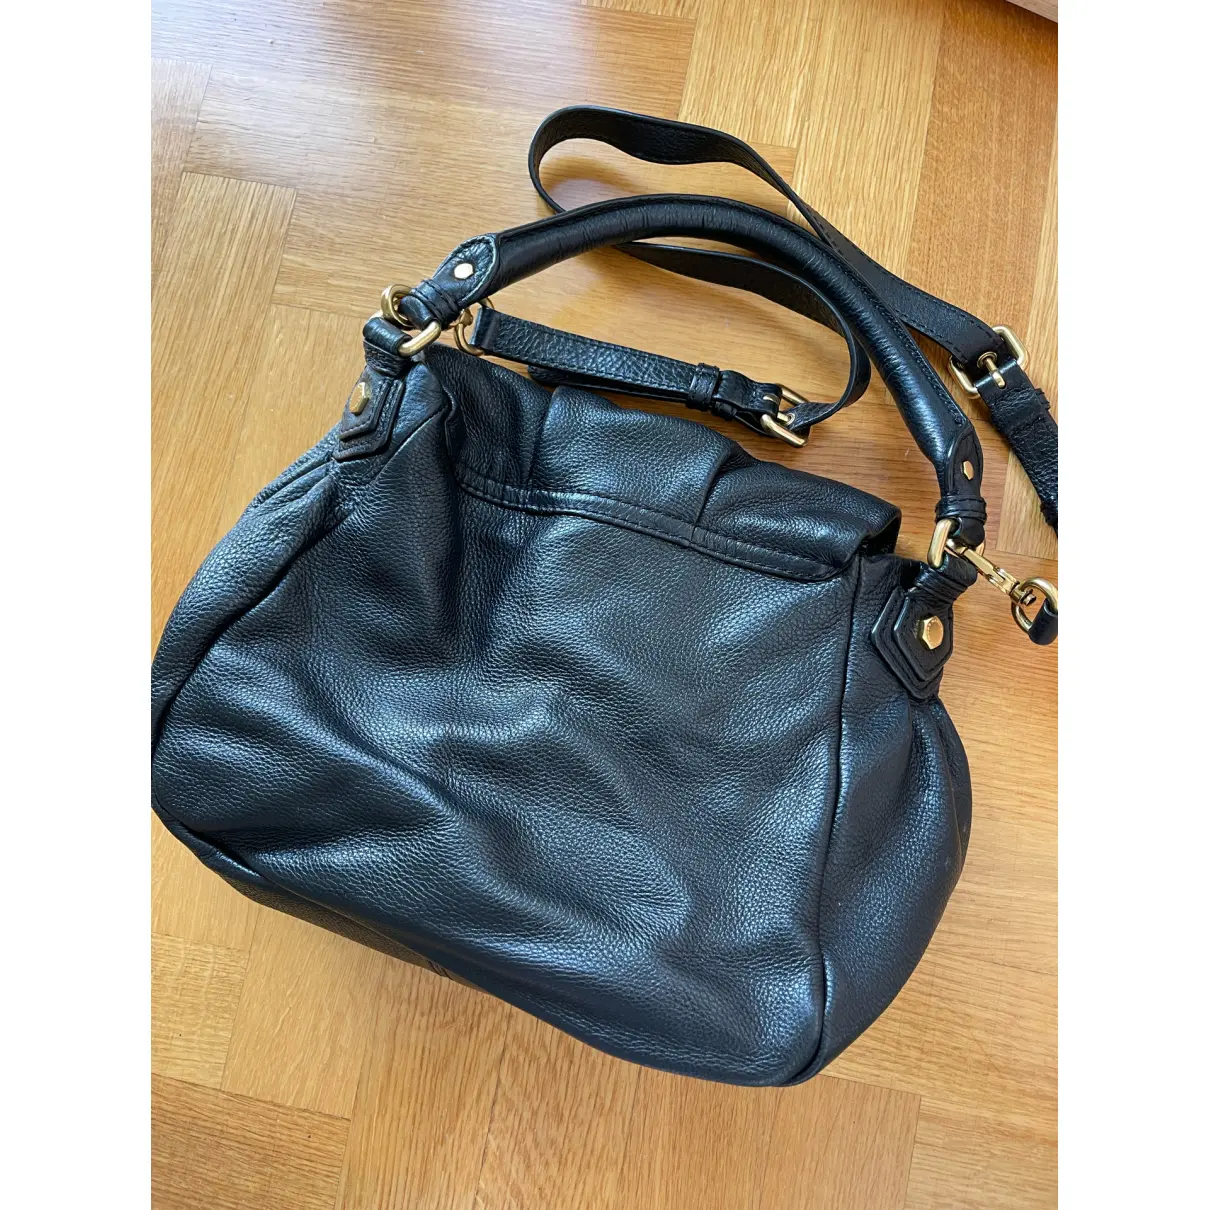 Buy Marc by Marc Jacobs Leather handbag online